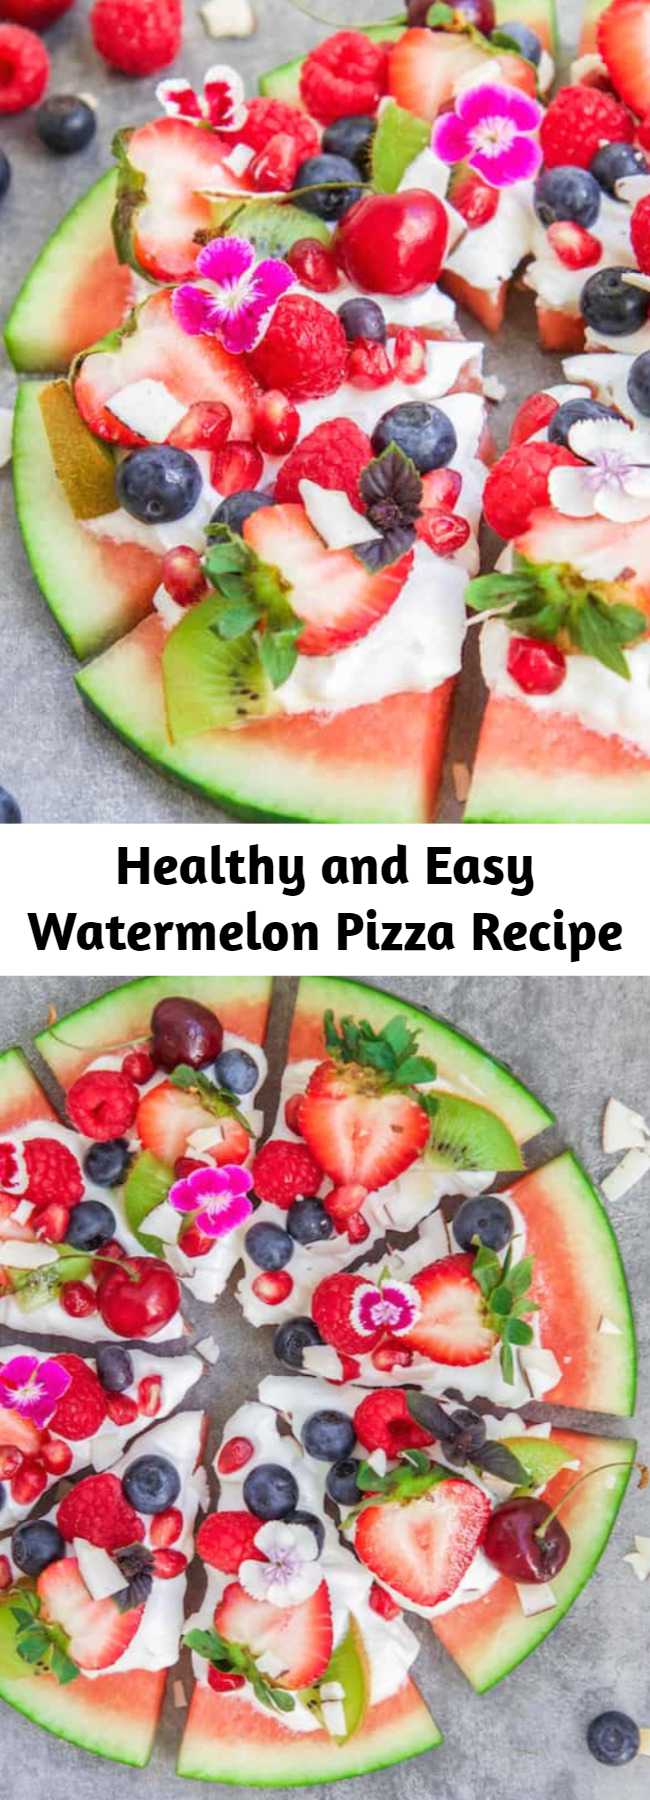 Healthy and Easy Watermelon Pizza Recipe - This watermelon pizza is a fun little treat that everyone can enjoy! It’s healthy and easy to make! Refreshing, delicious, and only takes 10 minutes to make.